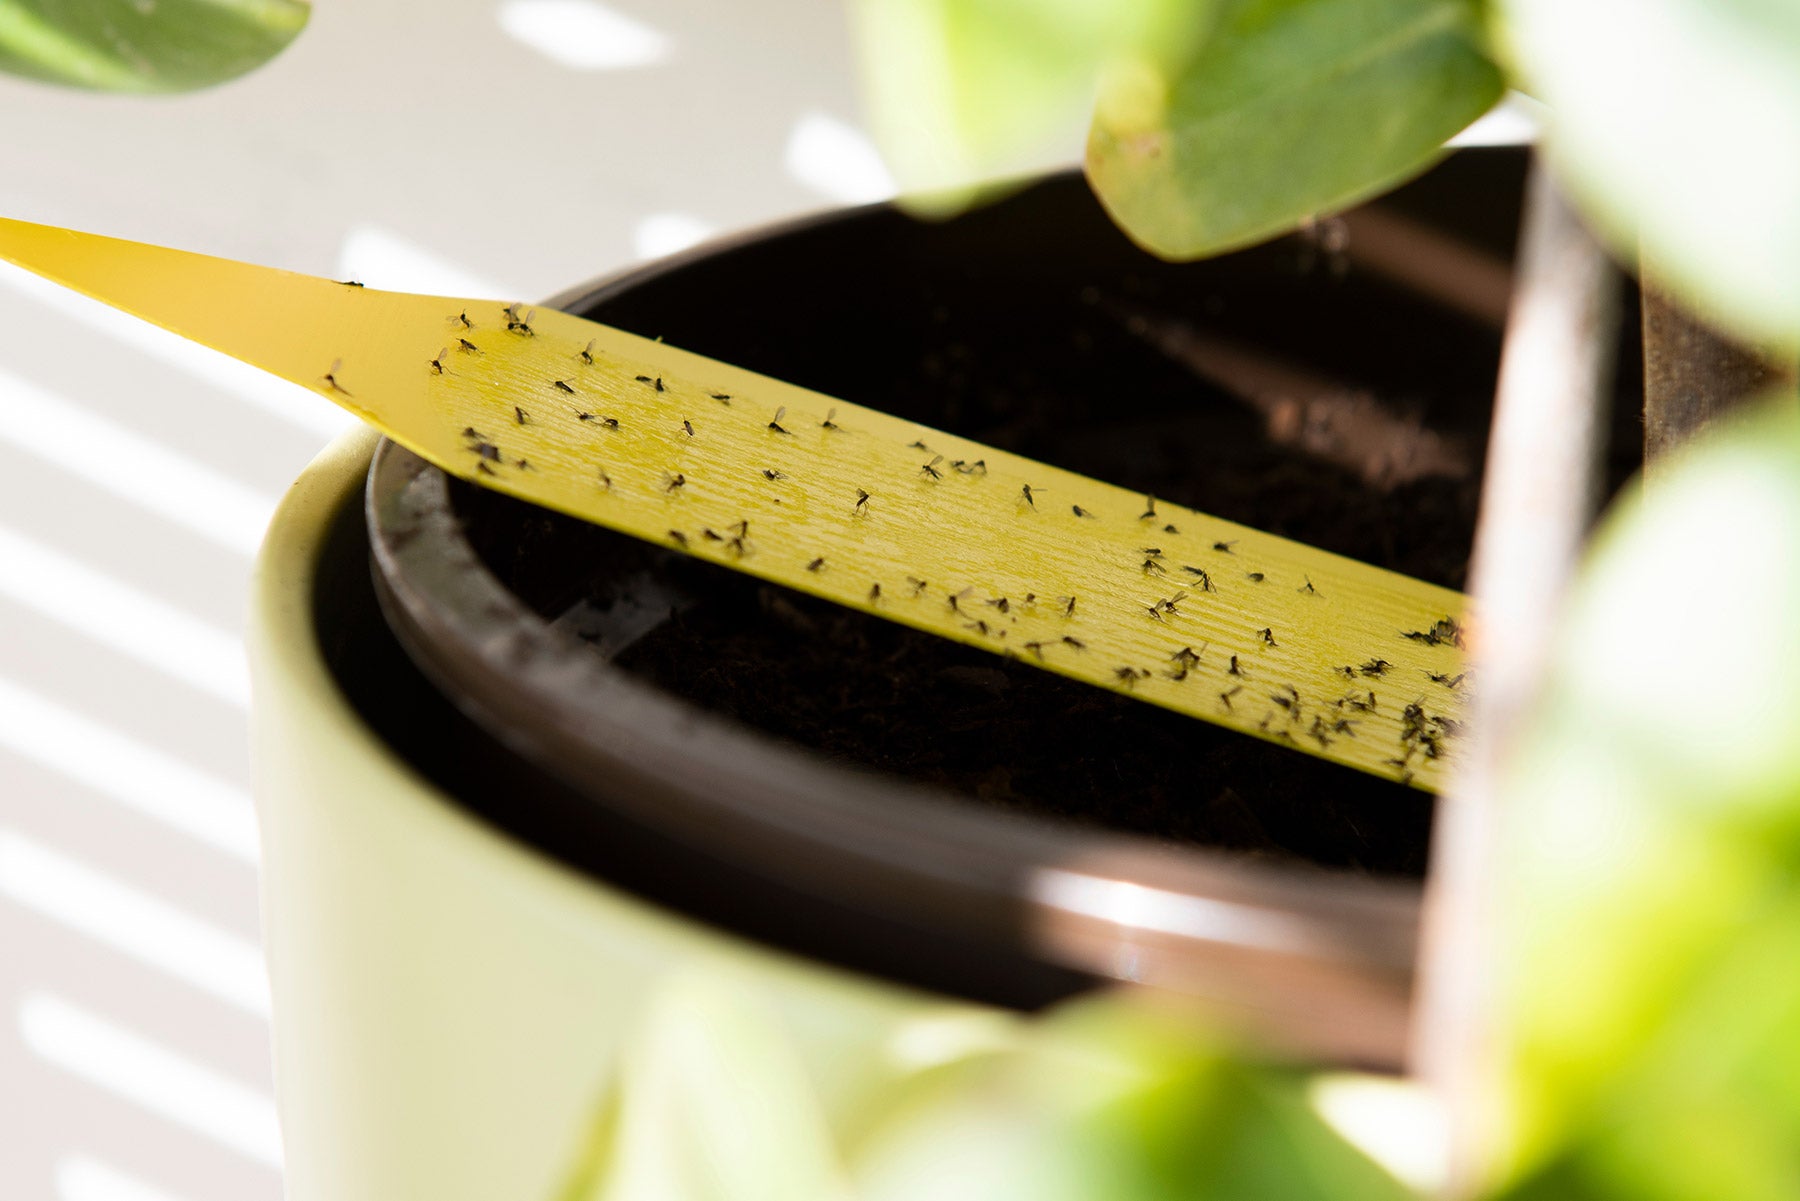 How to Get Rid of Fungus Gnats Effectively (Complete Guide)